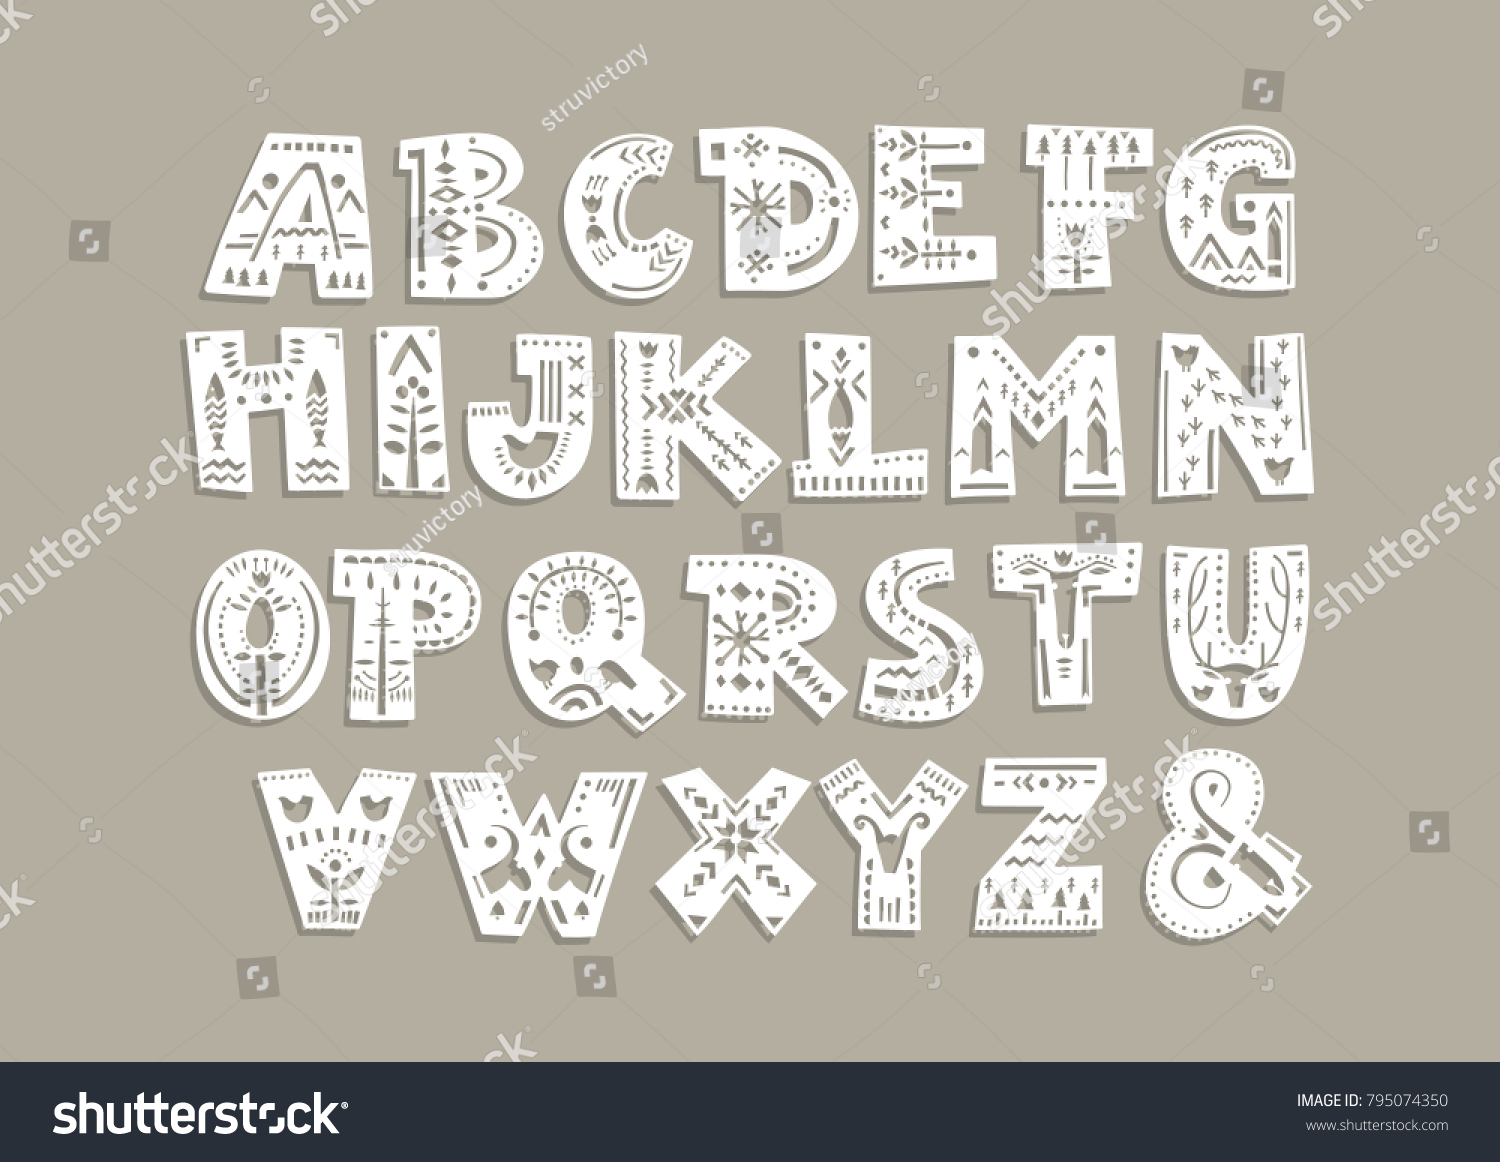 vector capital alphabet cut out letters stock vector royalty free 795074350 shutterstock